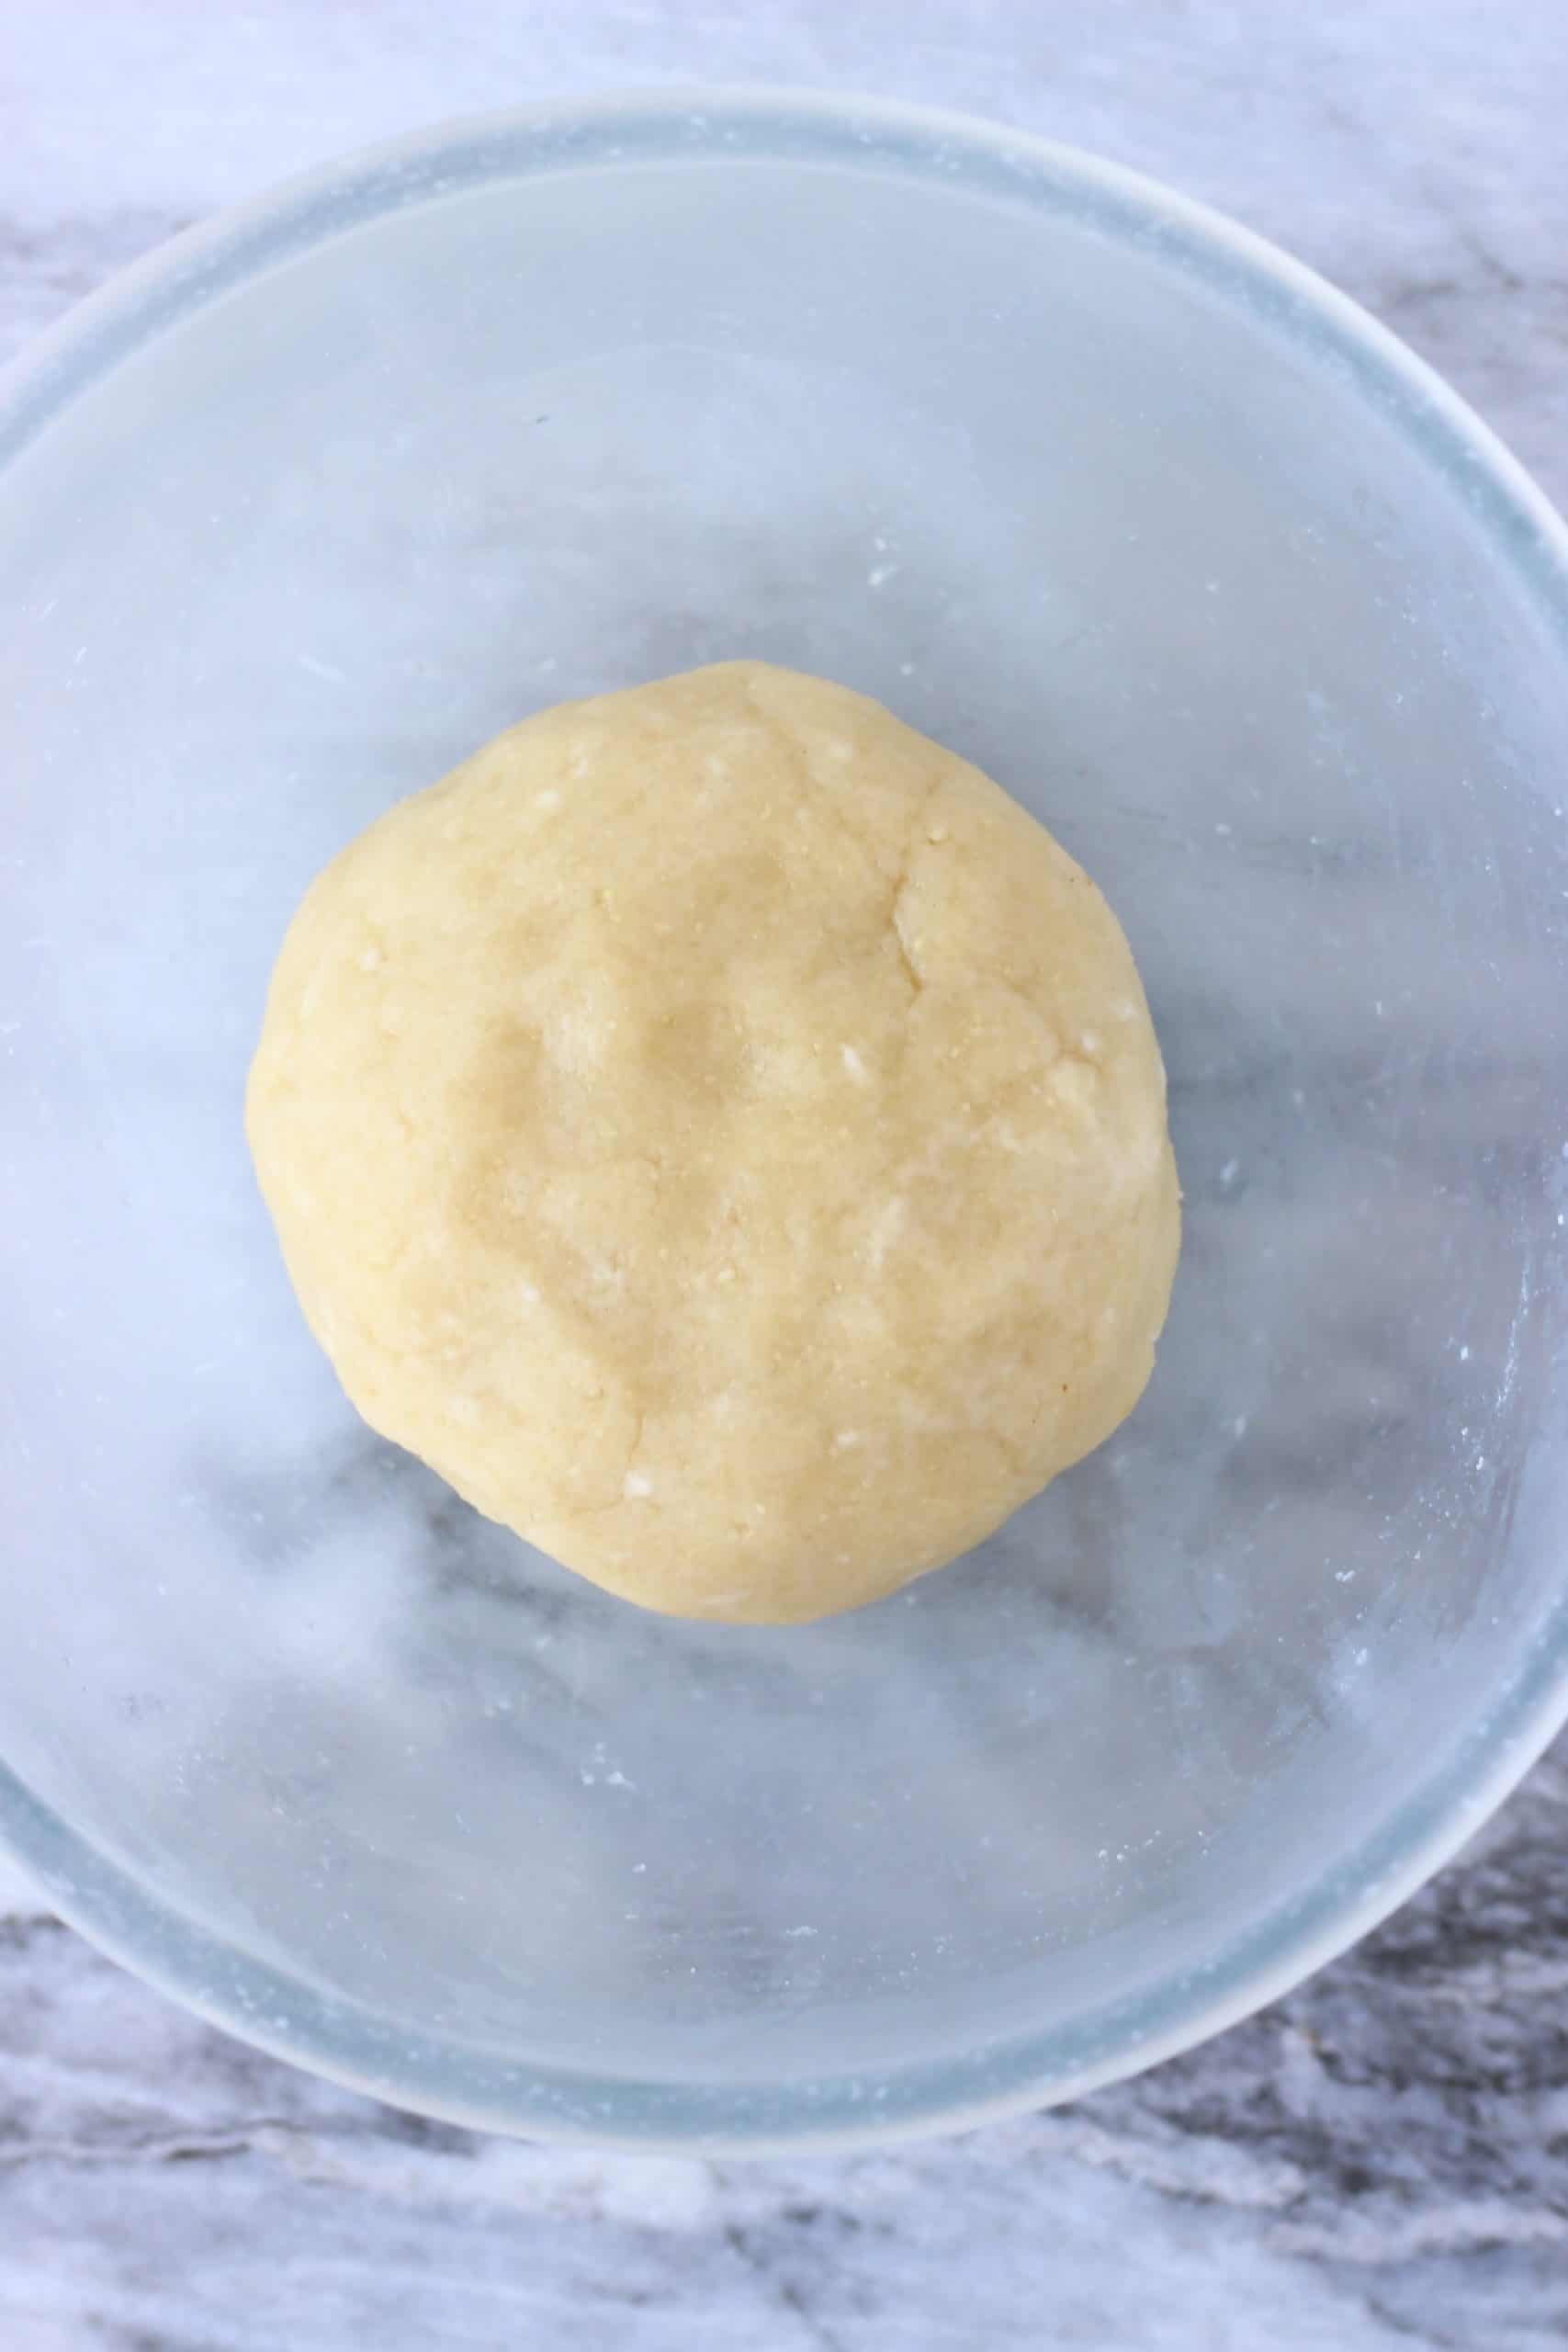 Raw gluten-free vegan pastry dough in a glass bowl